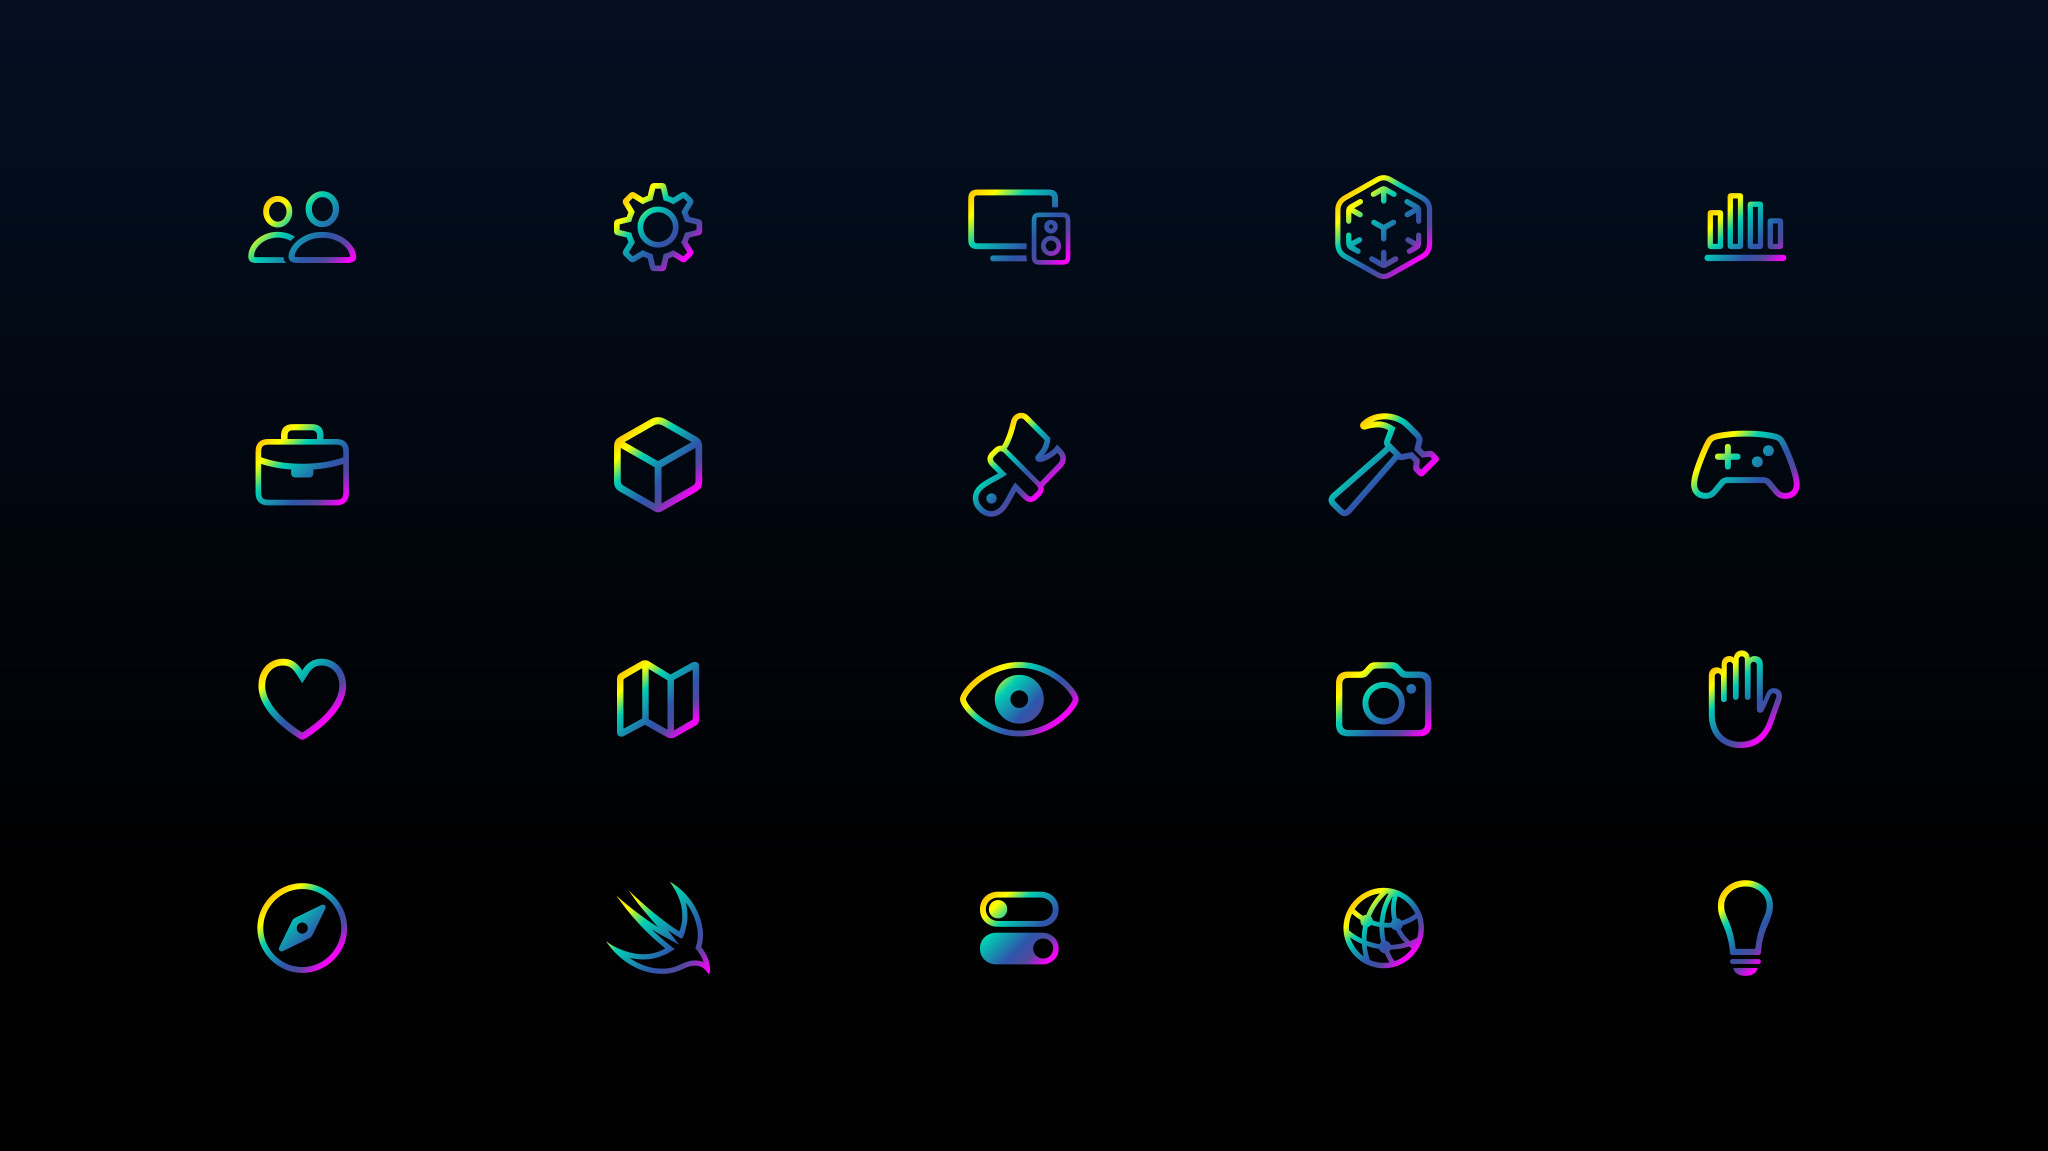 Rainbow colored icons representing development topics are arranged in four rows on a black background.